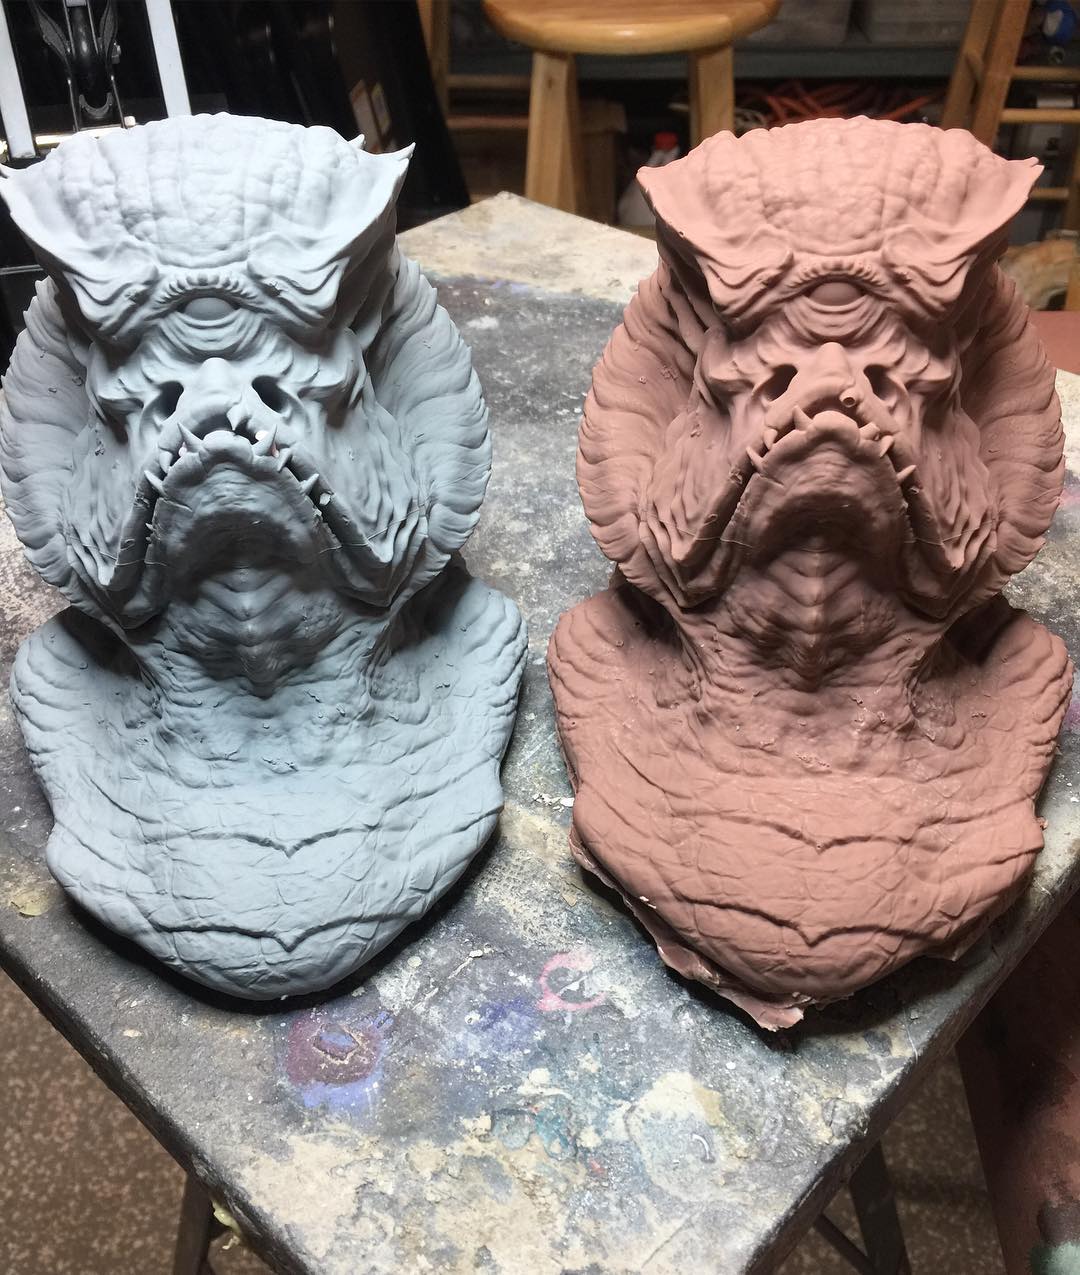 Monster Clay on X: Monster Clay Sculpt of the Day 09/22/18